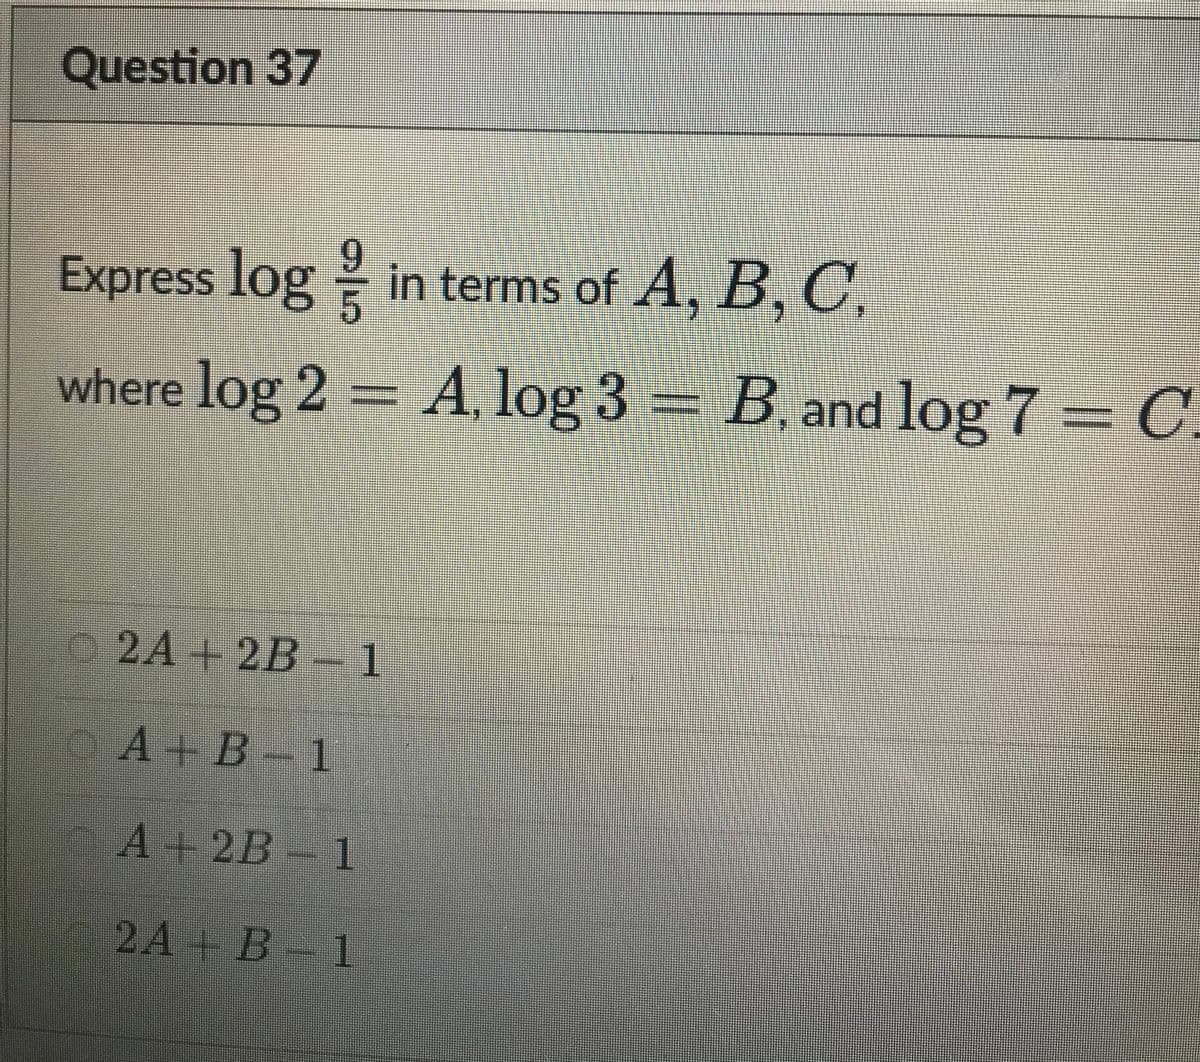 Question 37
*******
6.
Express log in terms of A, B, C,
where log 2 = A, log 3 = B. and log 7 = C
O2A+2B-1
OA+B-1
A+2B 1
2A+B1
